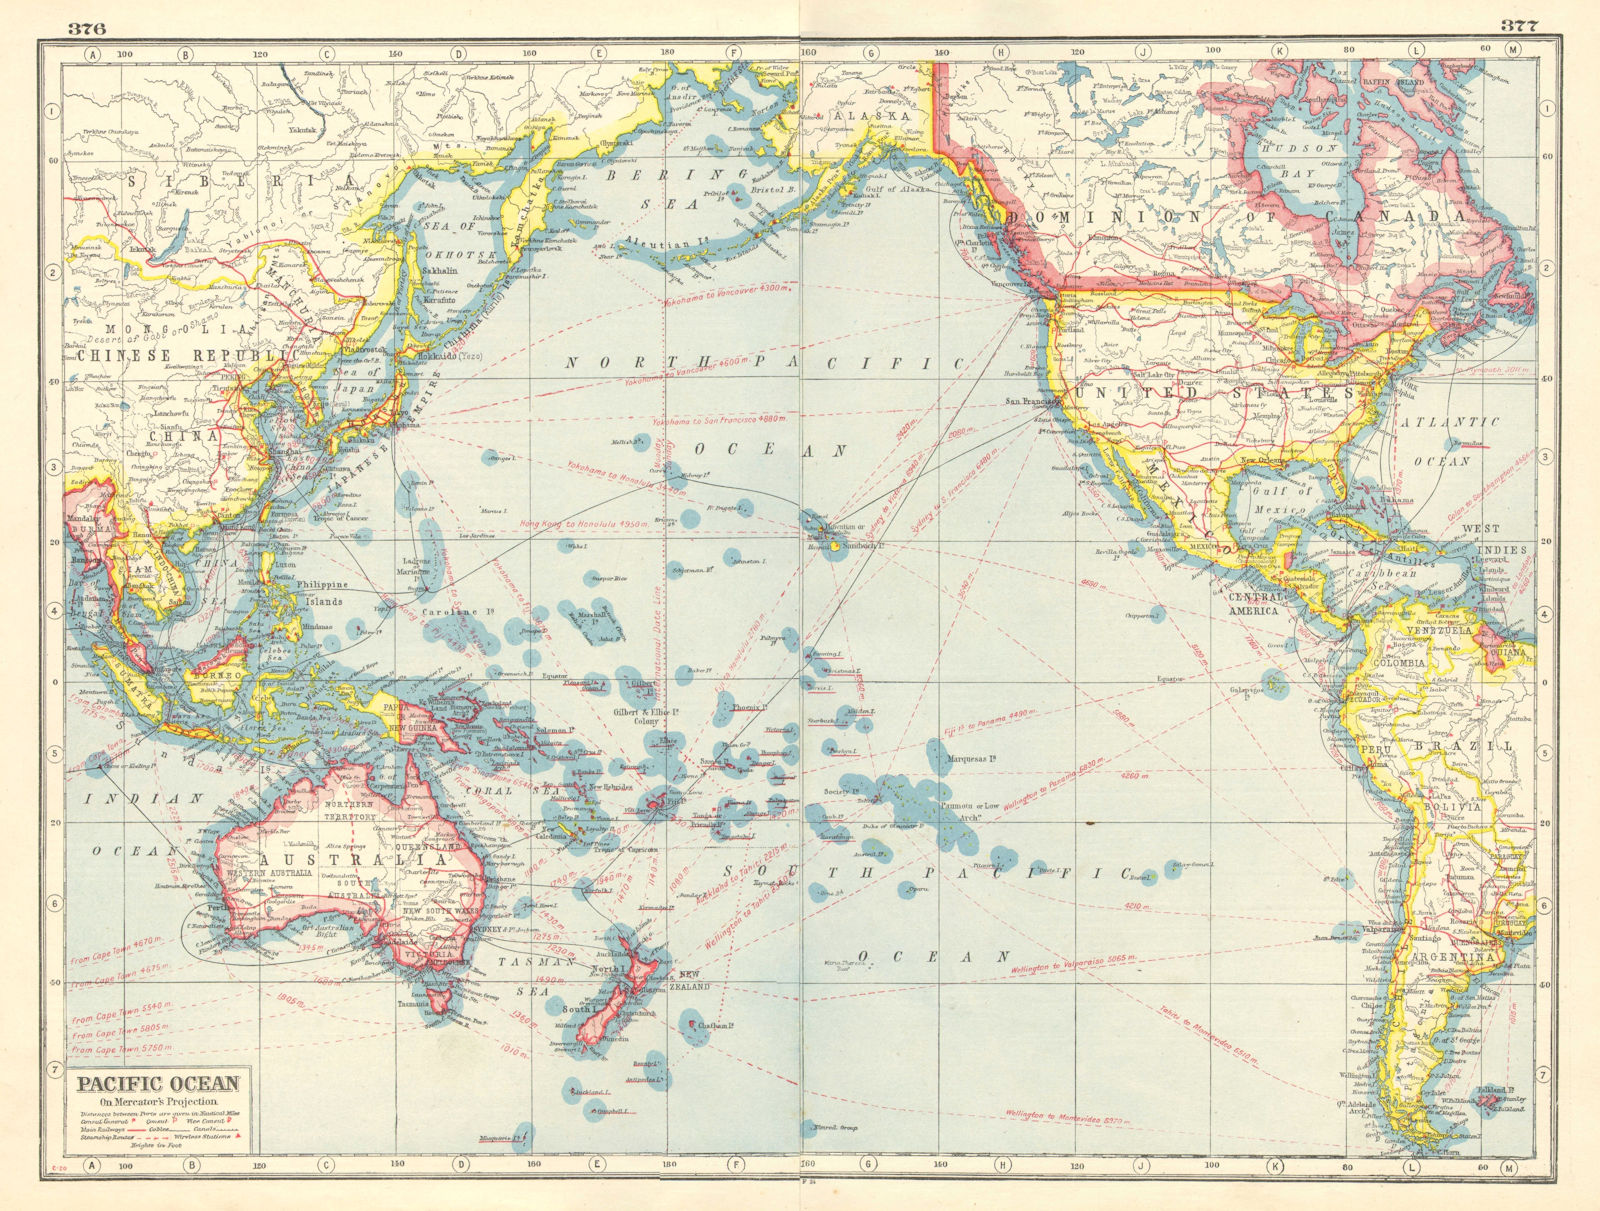 PACIFIC OCEAN. Mercator Projection. Railways cables steamship routes 1920 map